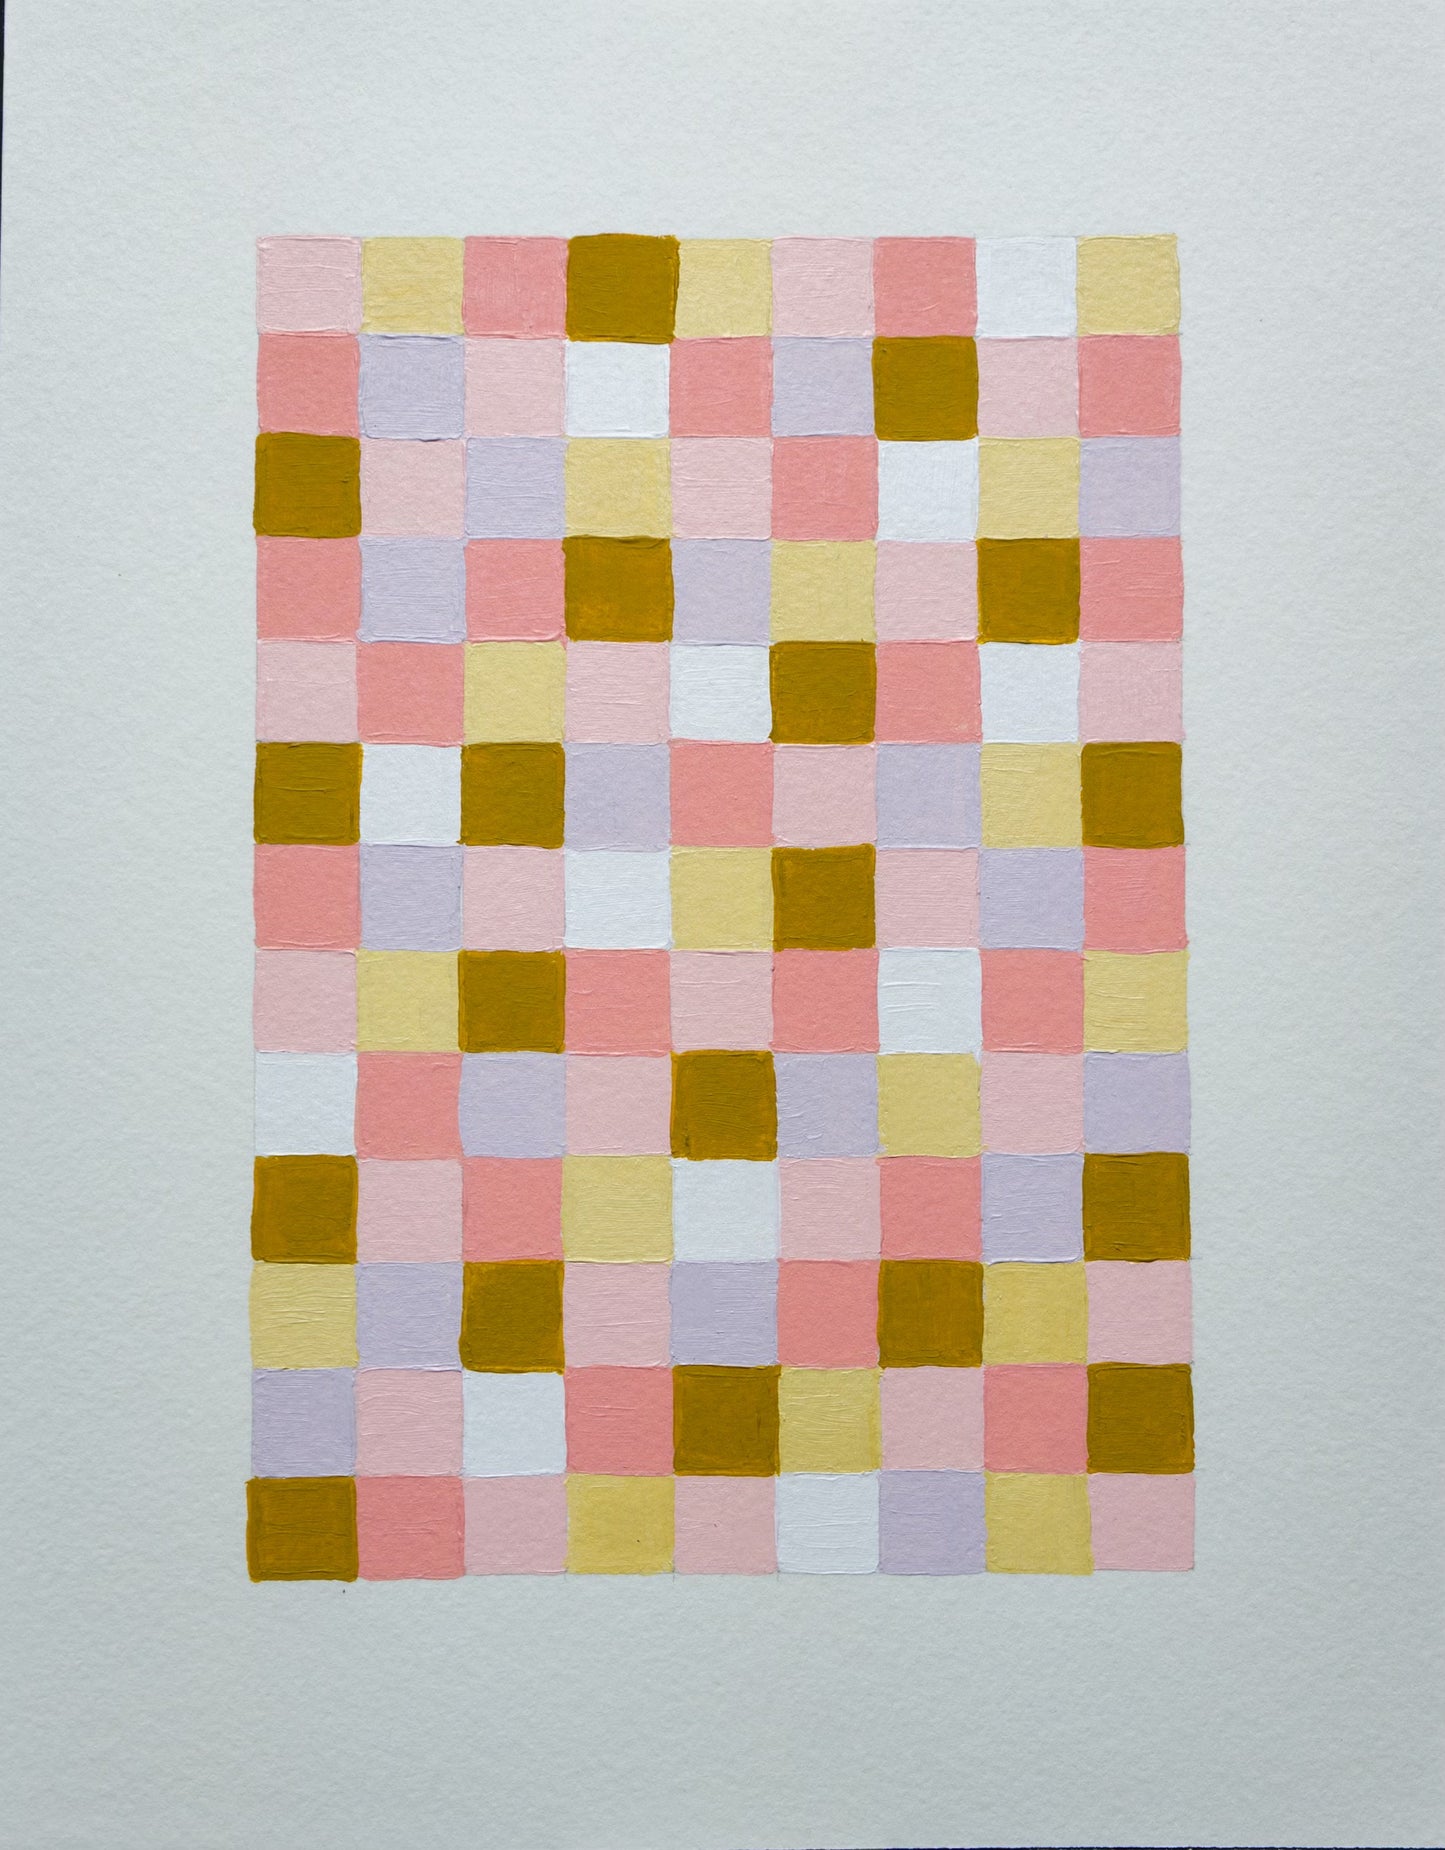 Ashley Sea - Pink and Ochre Squares